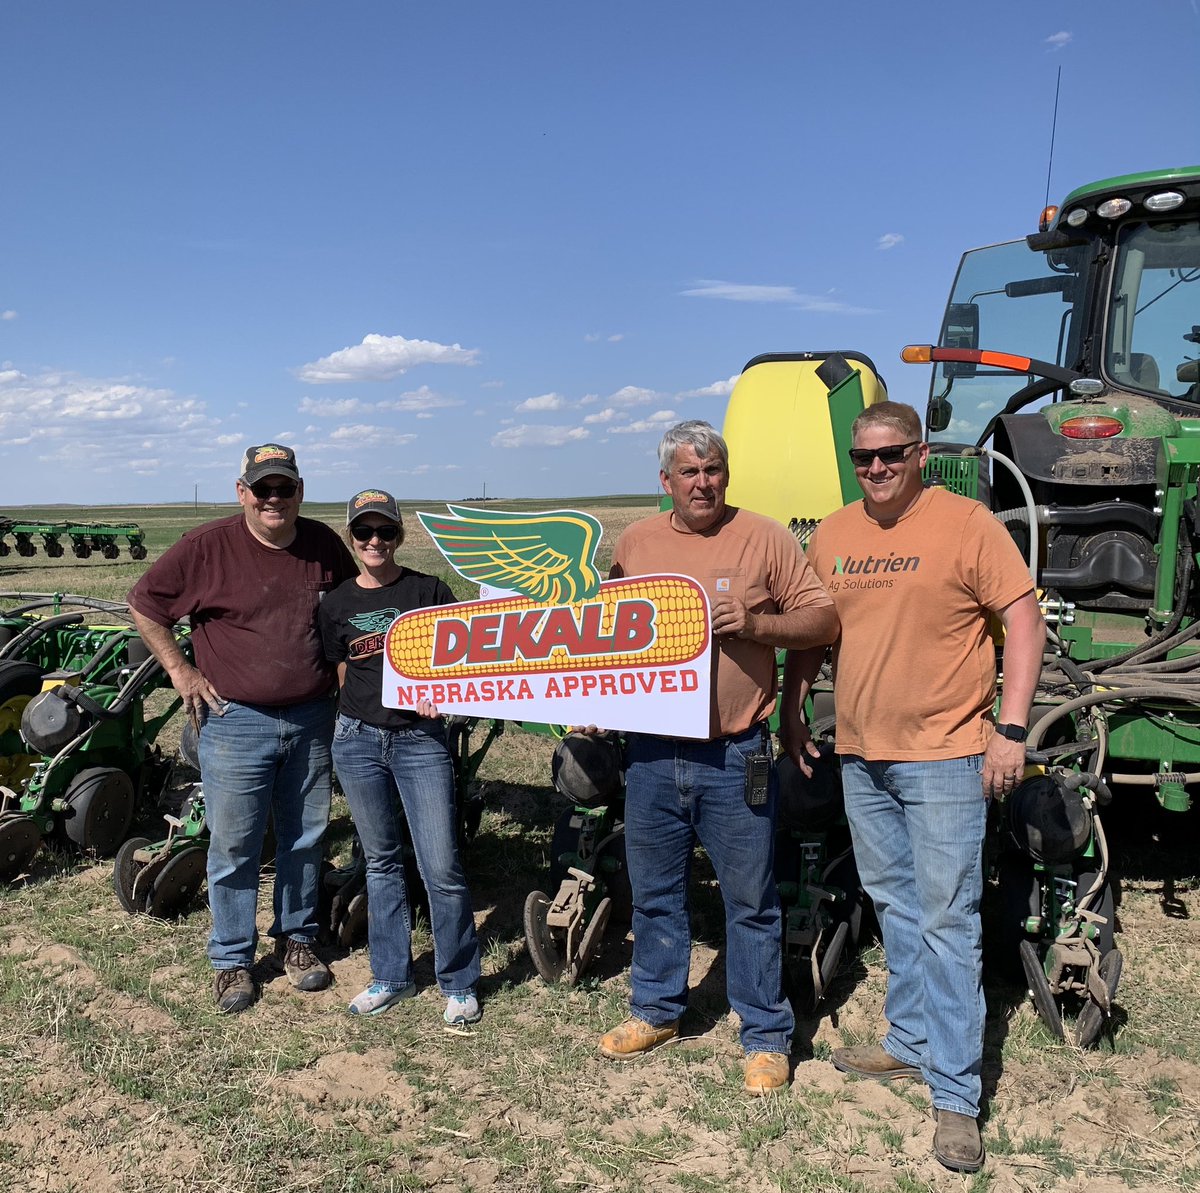 Local data drives better decisions and higher yields! Thank you Terryberry farms for planting a #Dekalb market development plot and a Preceon SmartCorn trial in SW #Nebraska! @scottway81 @DKAS_HP @Asgrow_DEKALB #WinningHasRoots #farming #agriculture #Bayer4NE